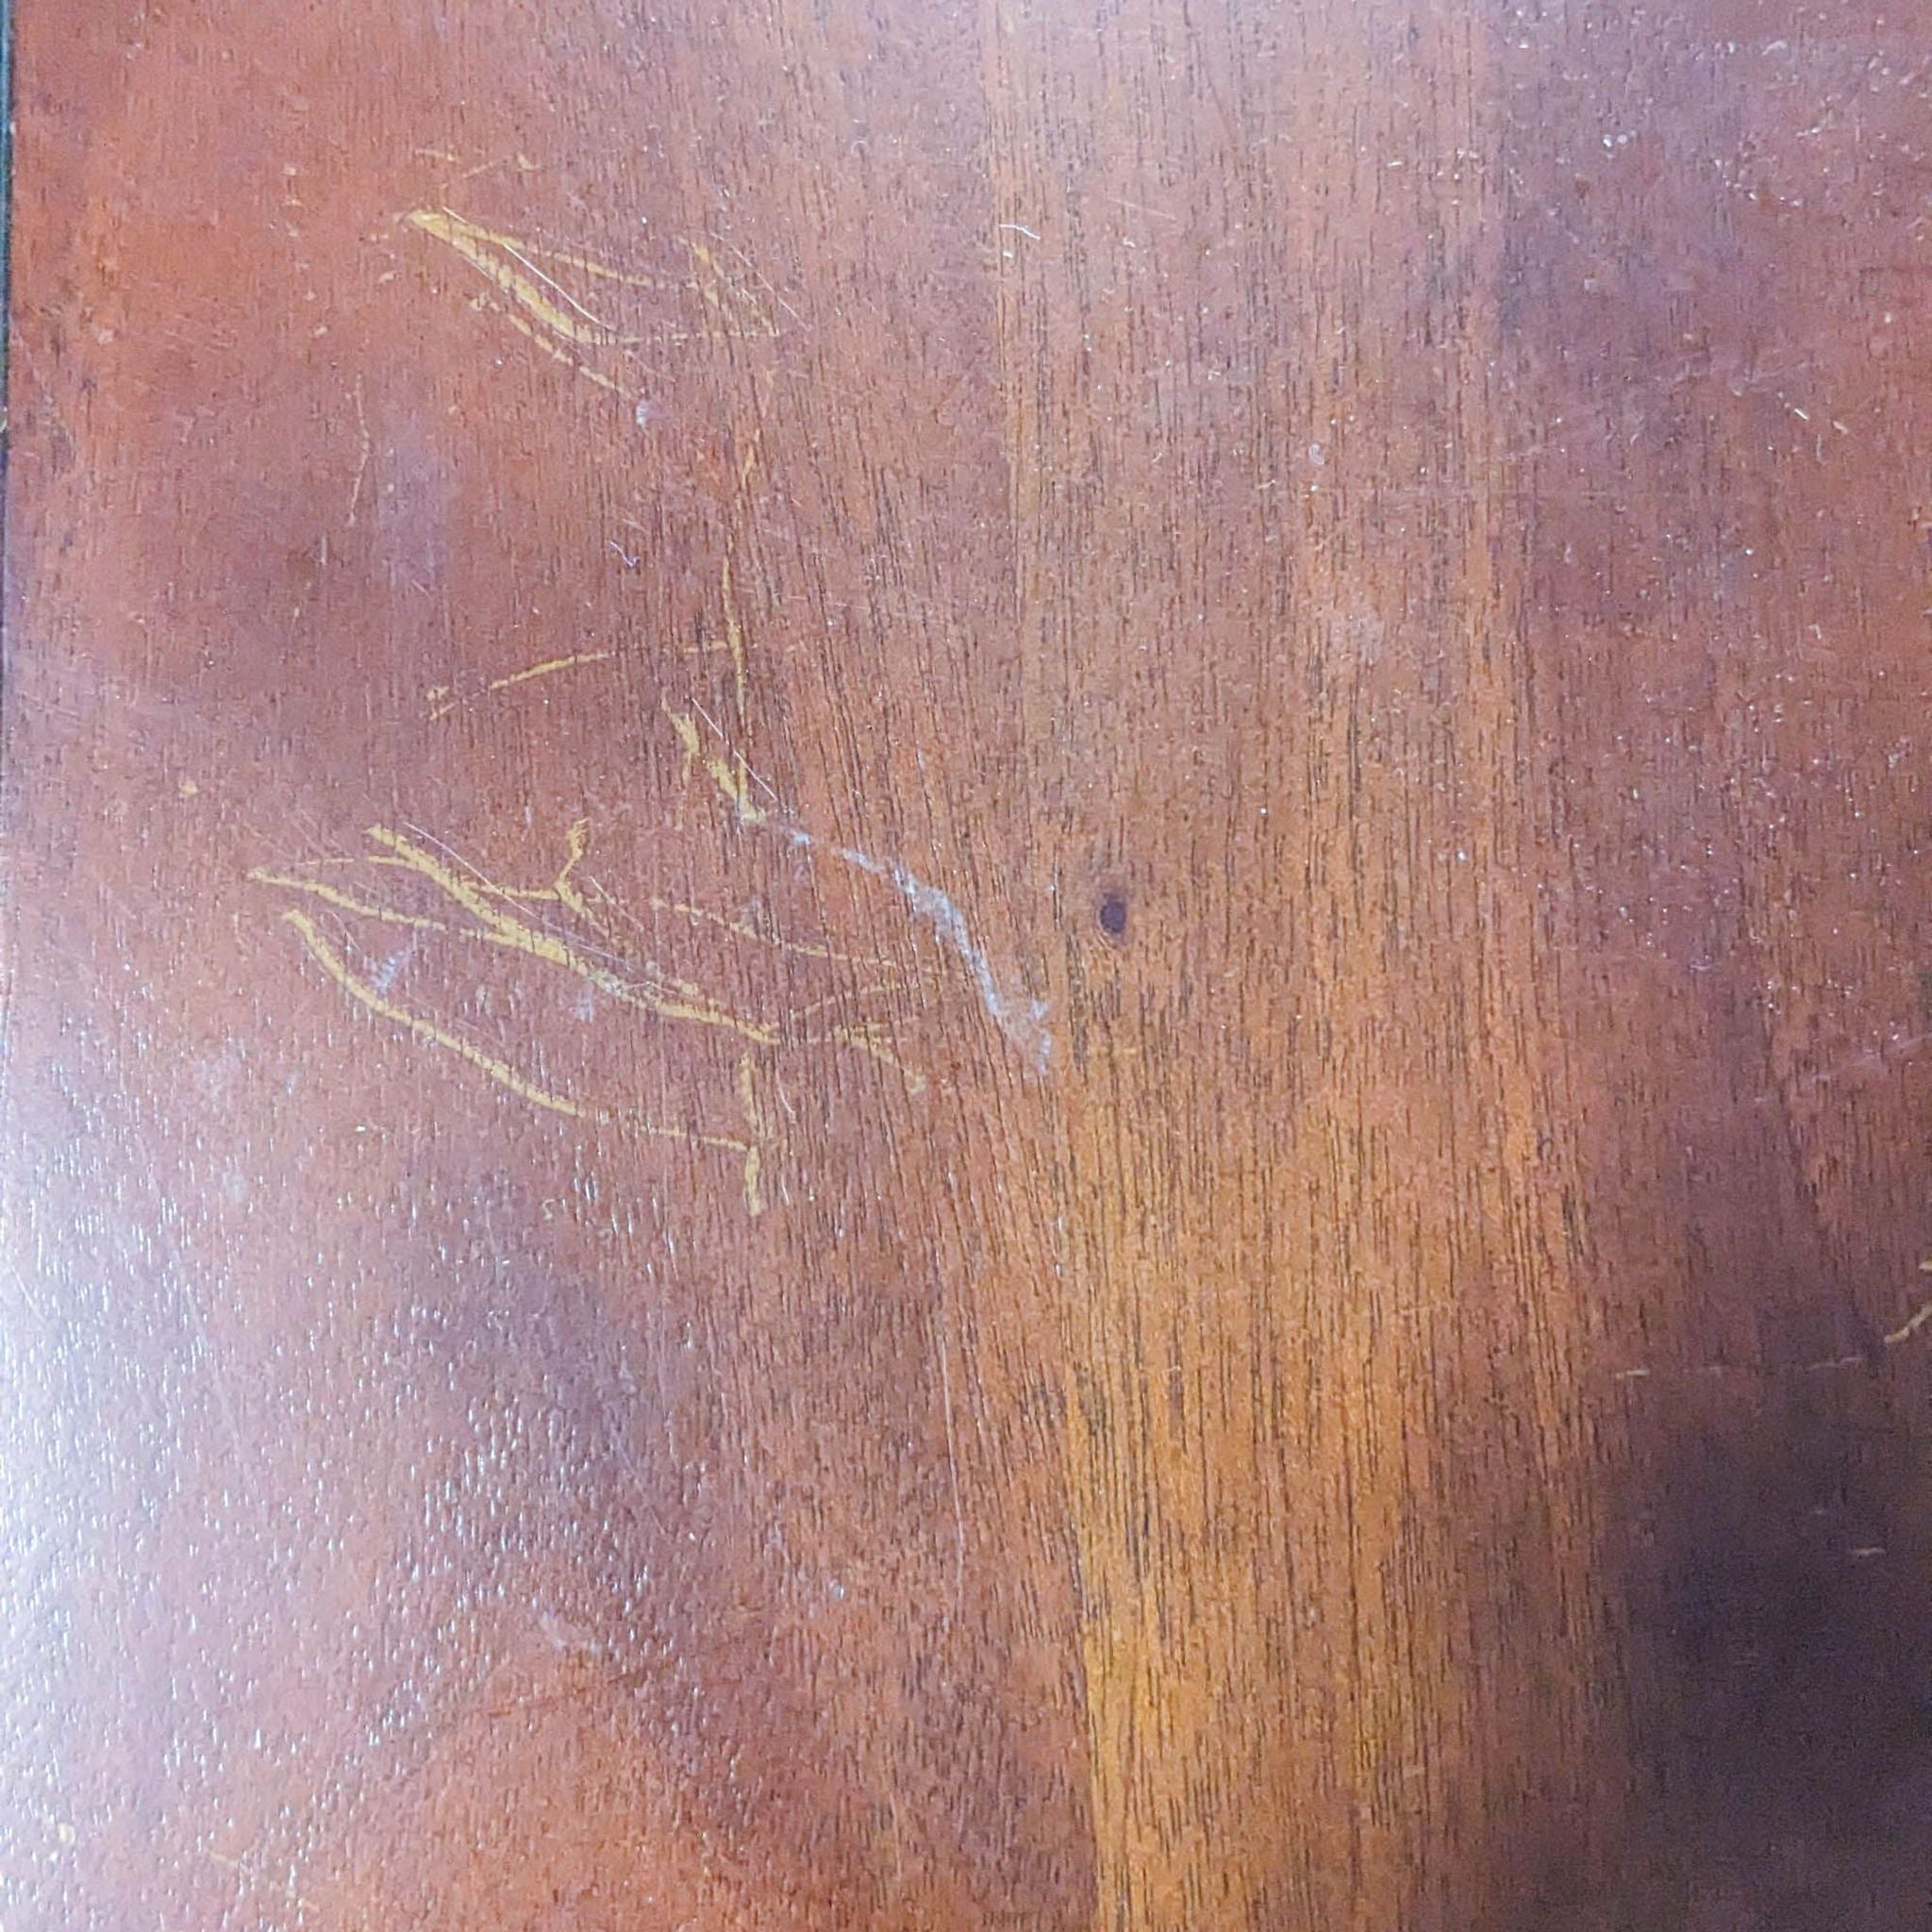 Close-up of a wooden surface showing scratches and wear, potentially part of a Pottery Barn furniture piece.